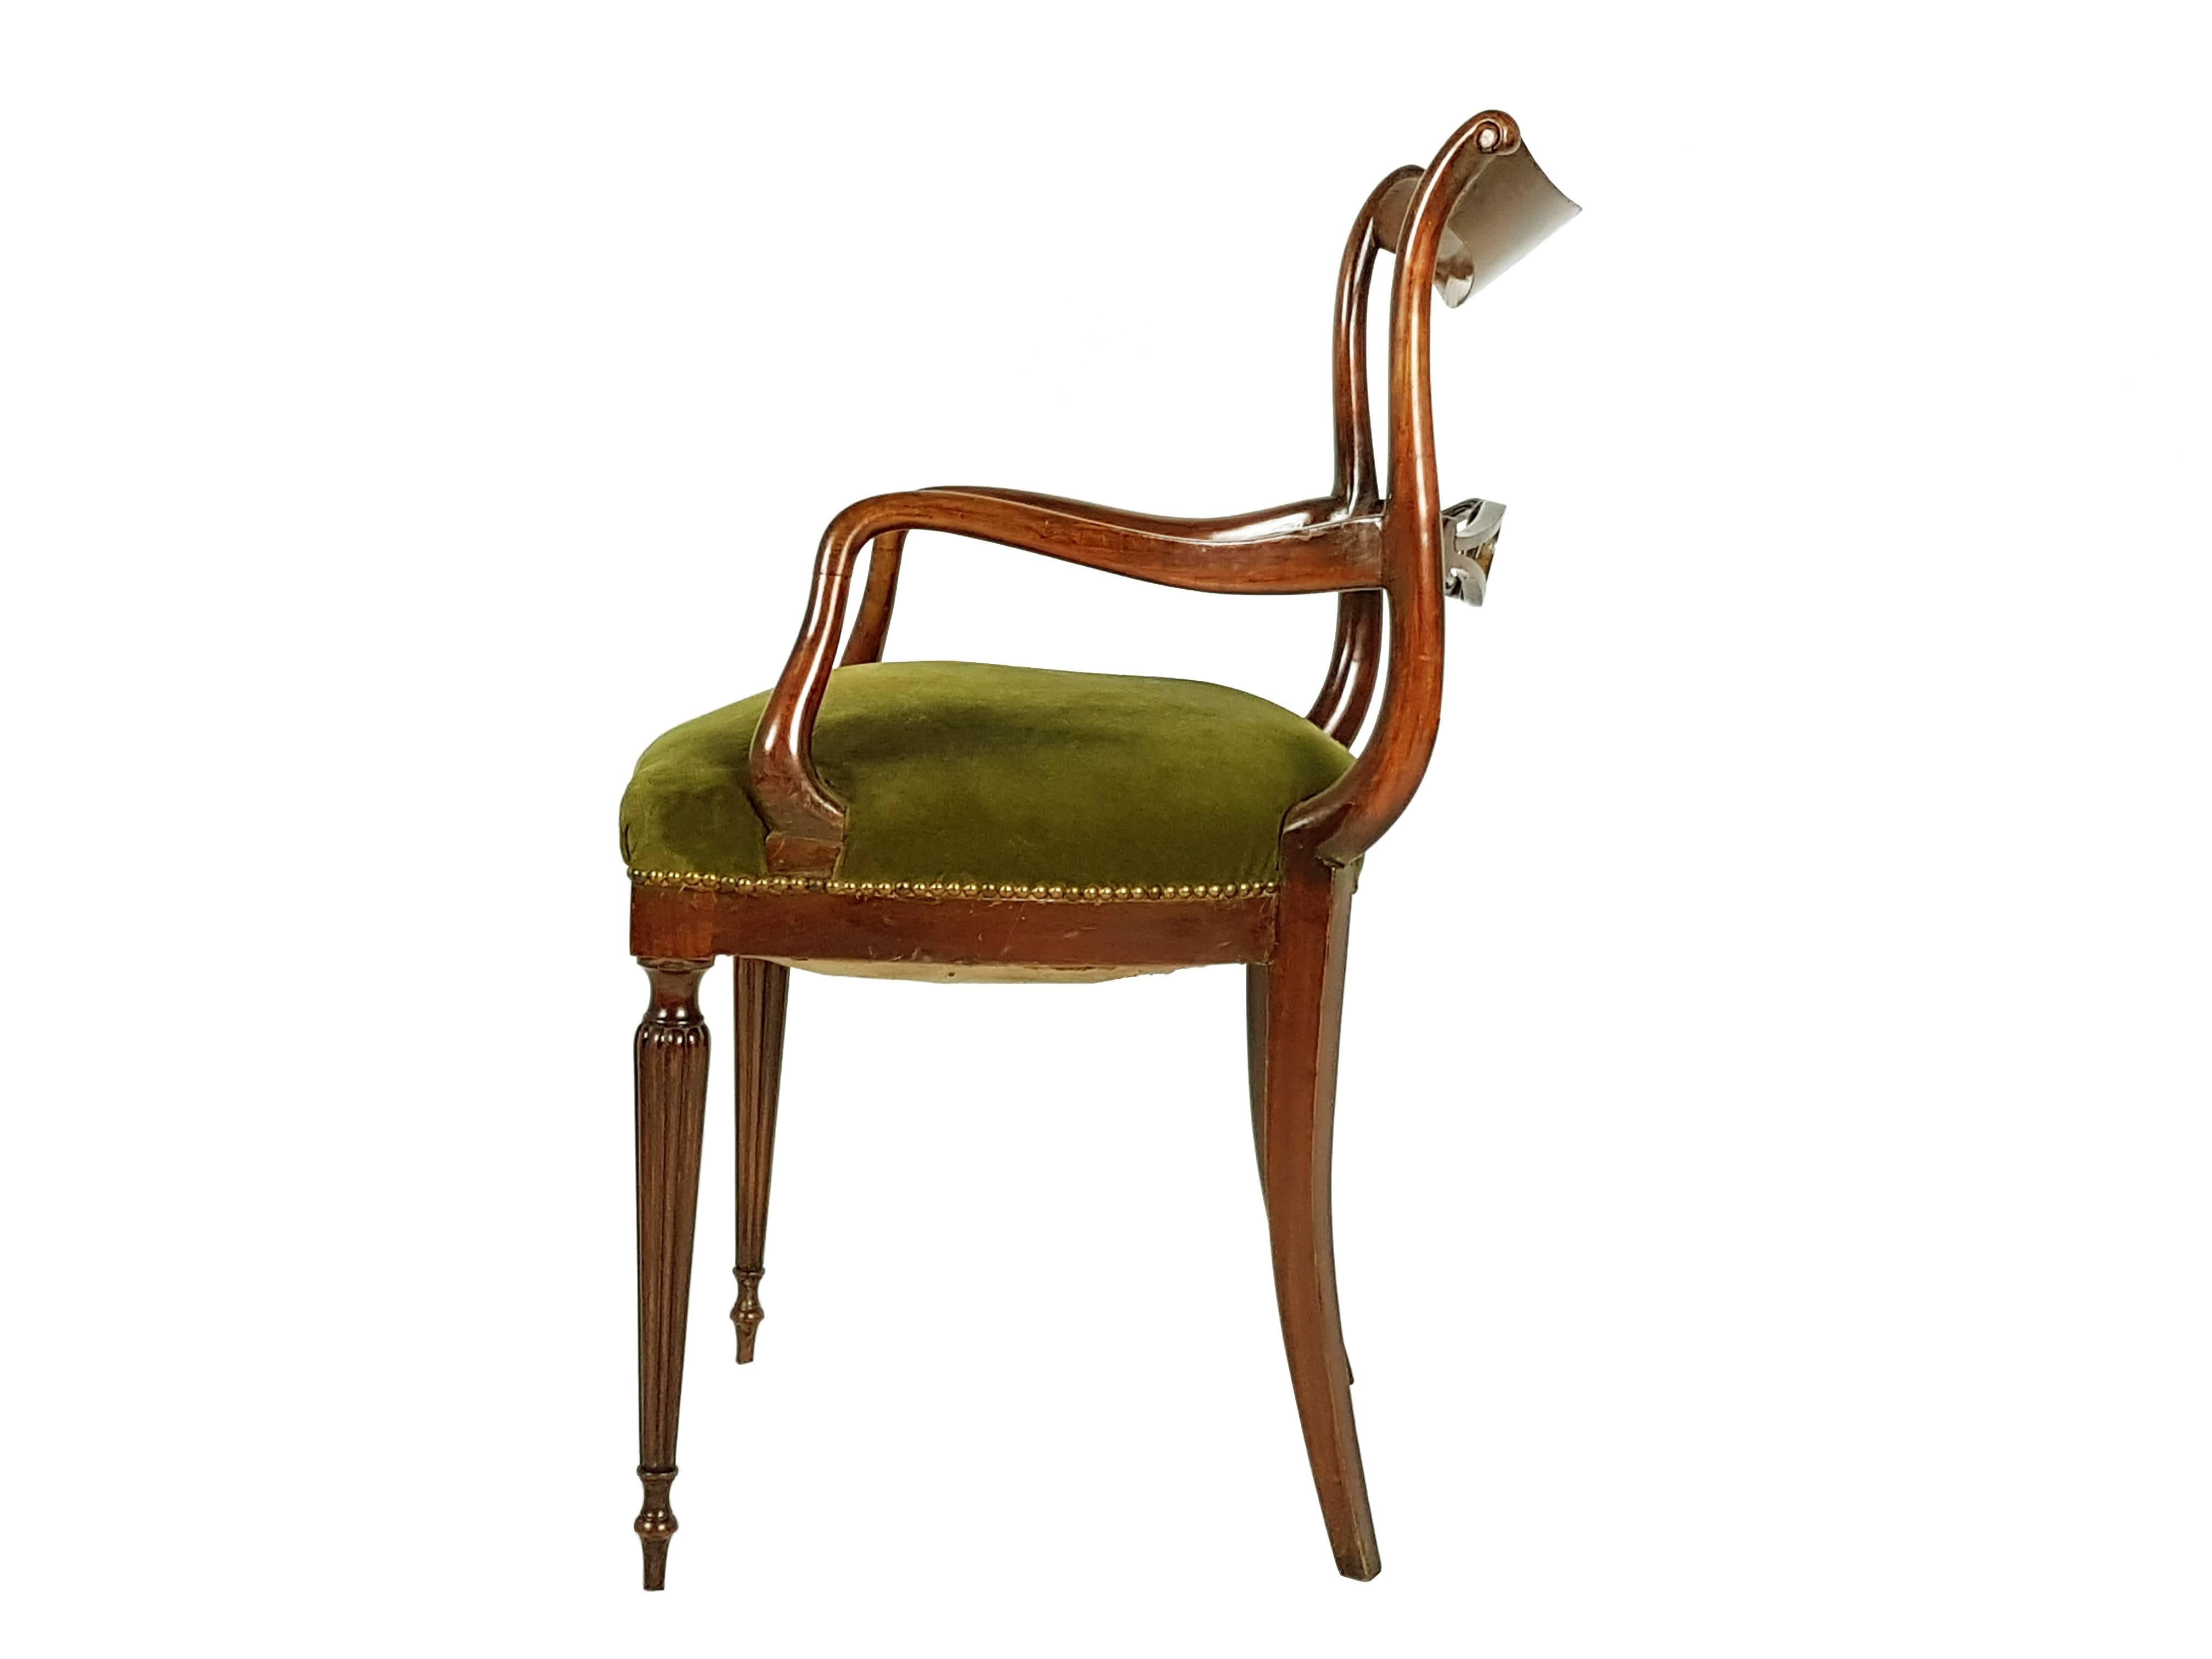 This beautiful armchair was produced in Italy, circa 1950s. It is made from a sculptural wooden structure with a green velvet upholstery. Its Classic and elegant style resembles contemporary products designed by Carlo Enrico Rava. The chair remains